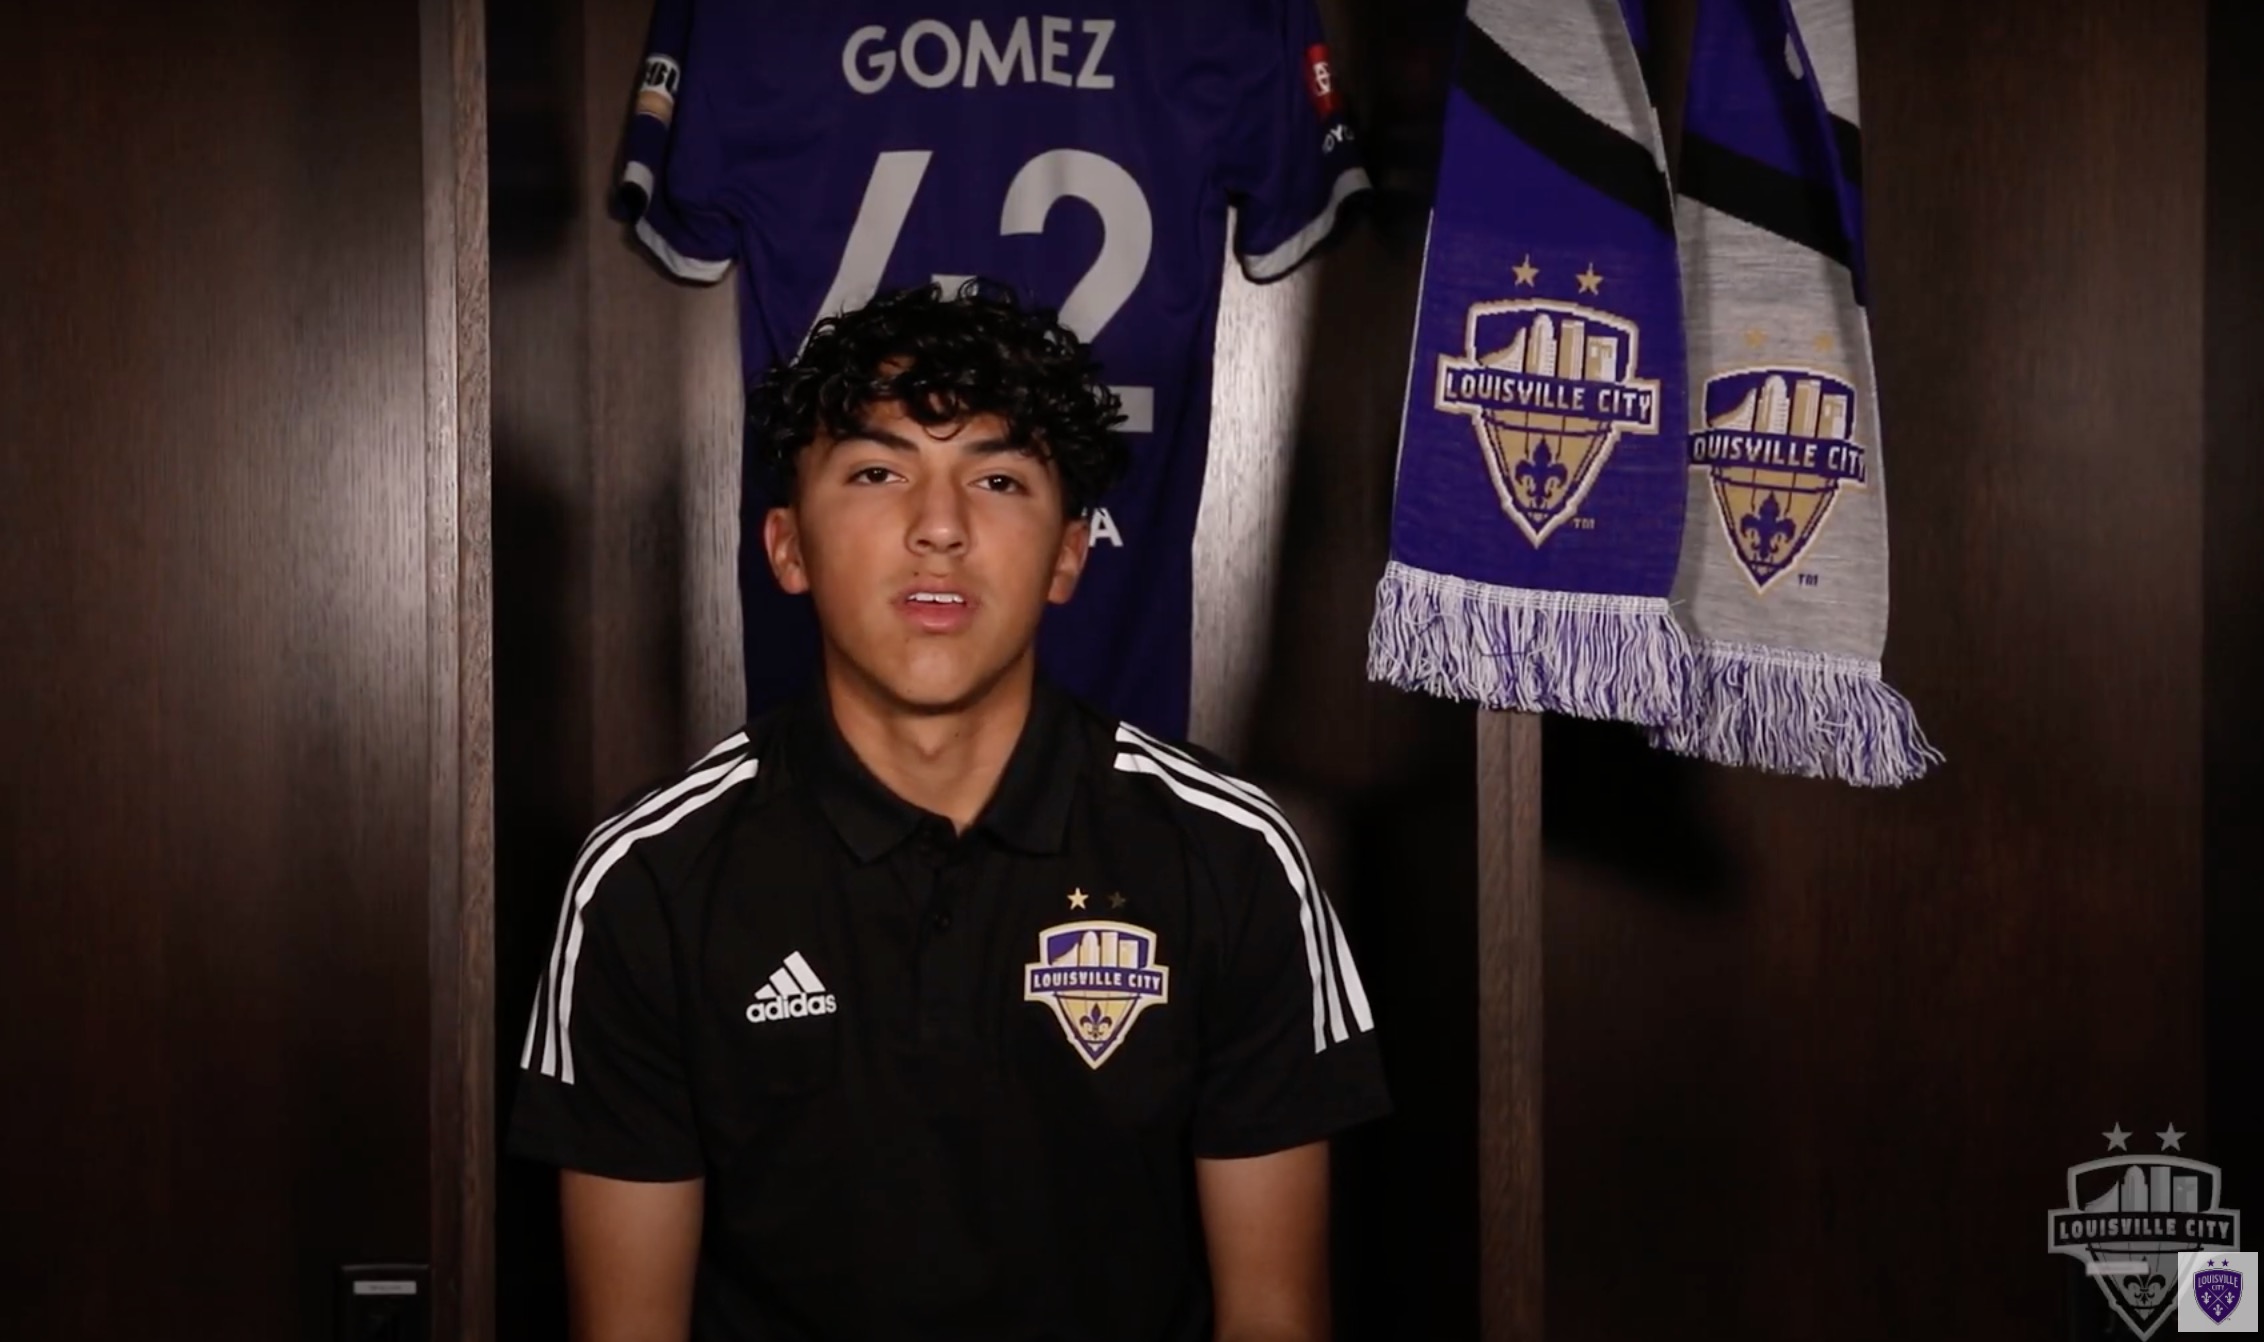 Gomez introducing himself to Louisville City fans last year.